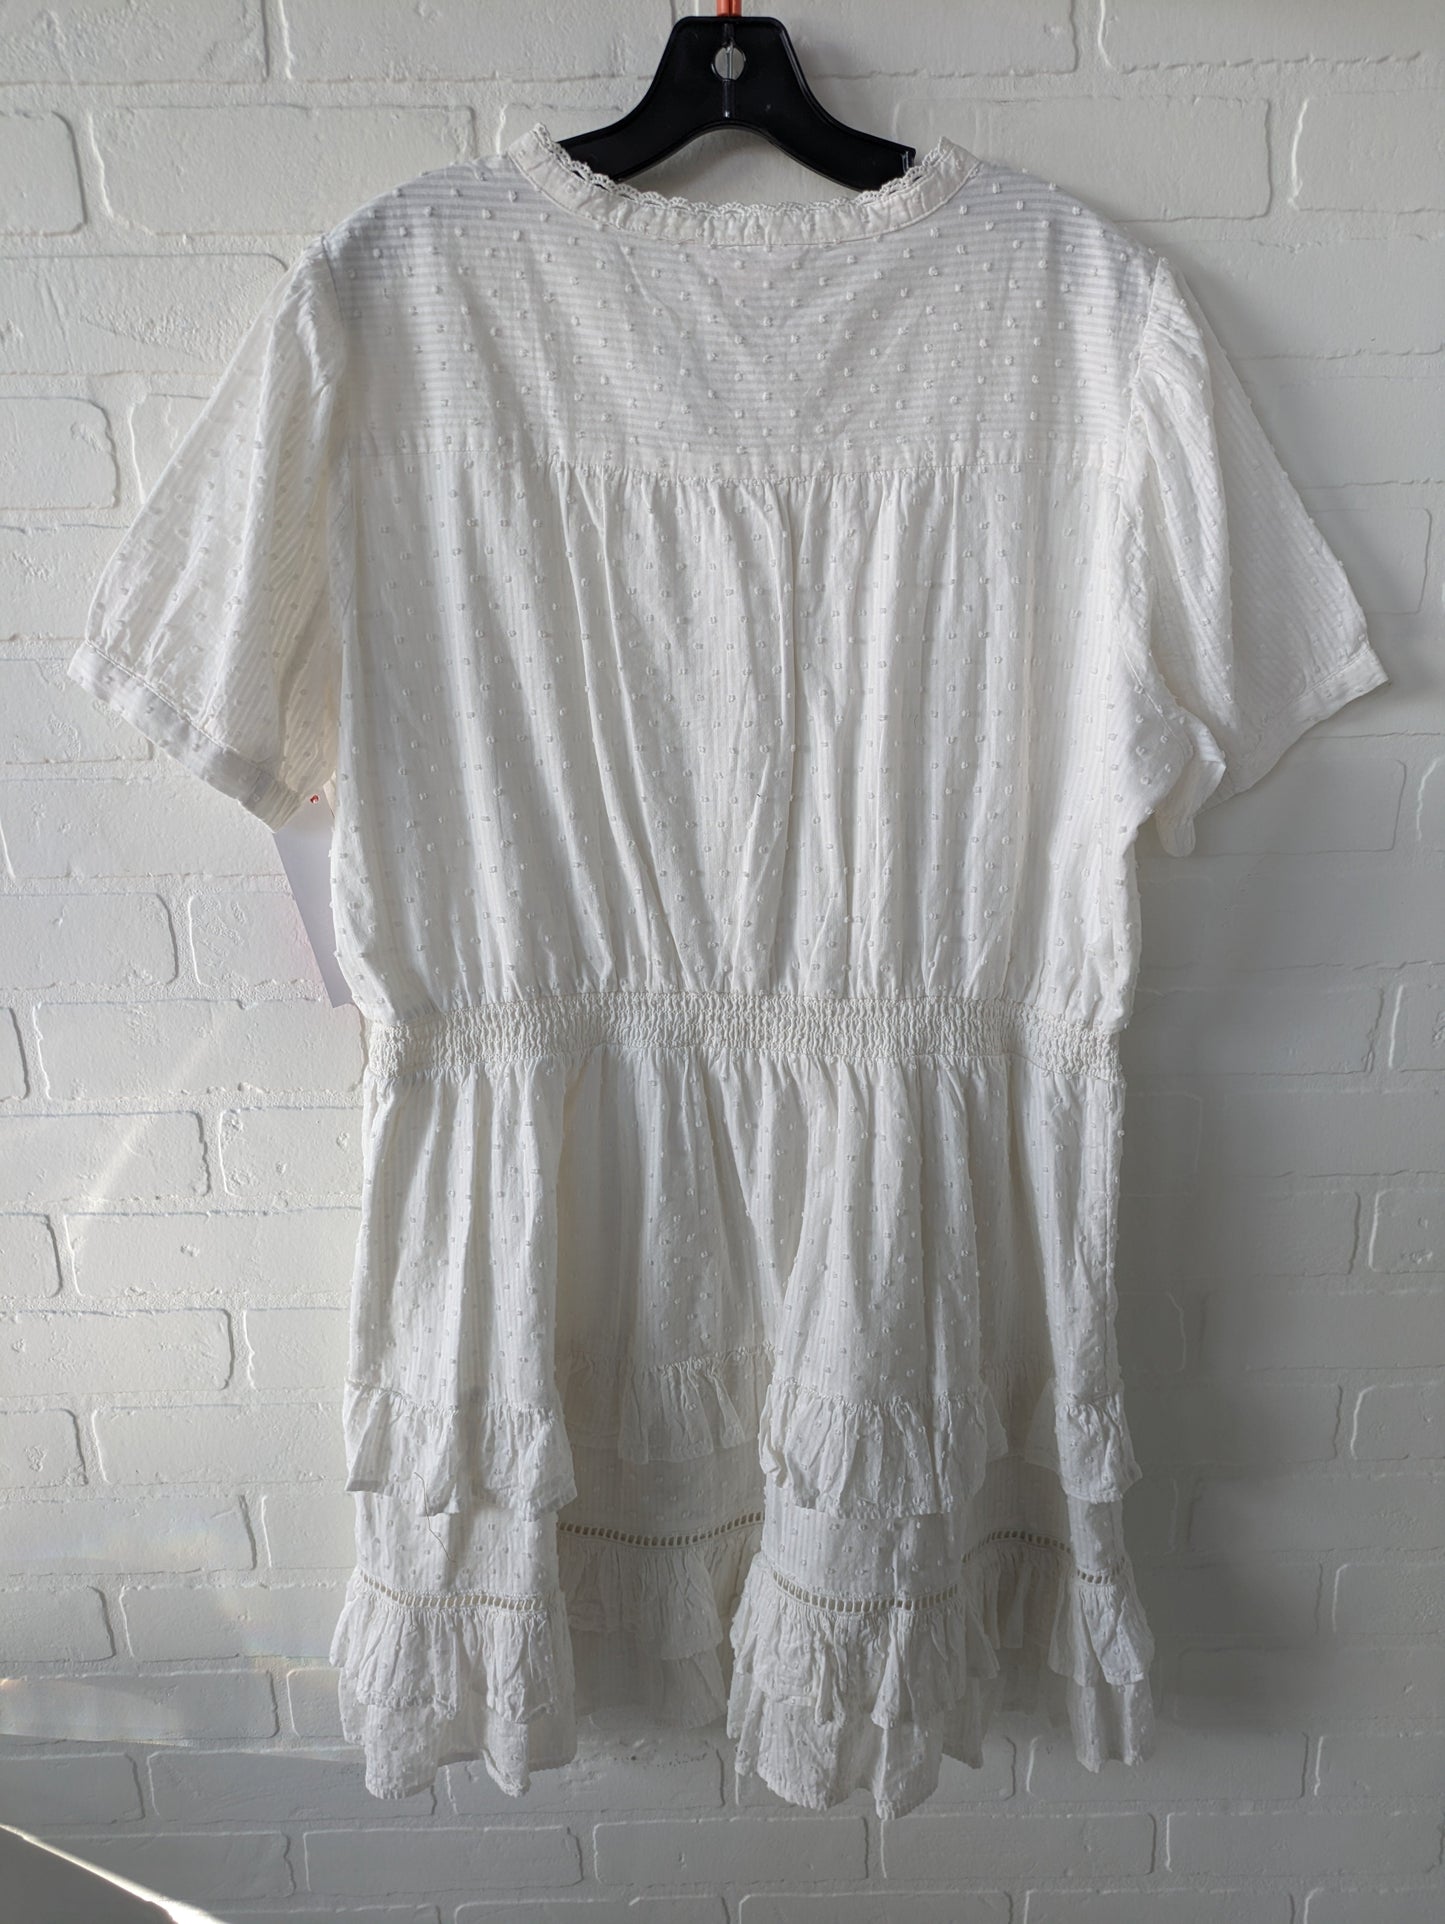 Dress Casual Short By Lc Lauren Conrad  Size: 1x